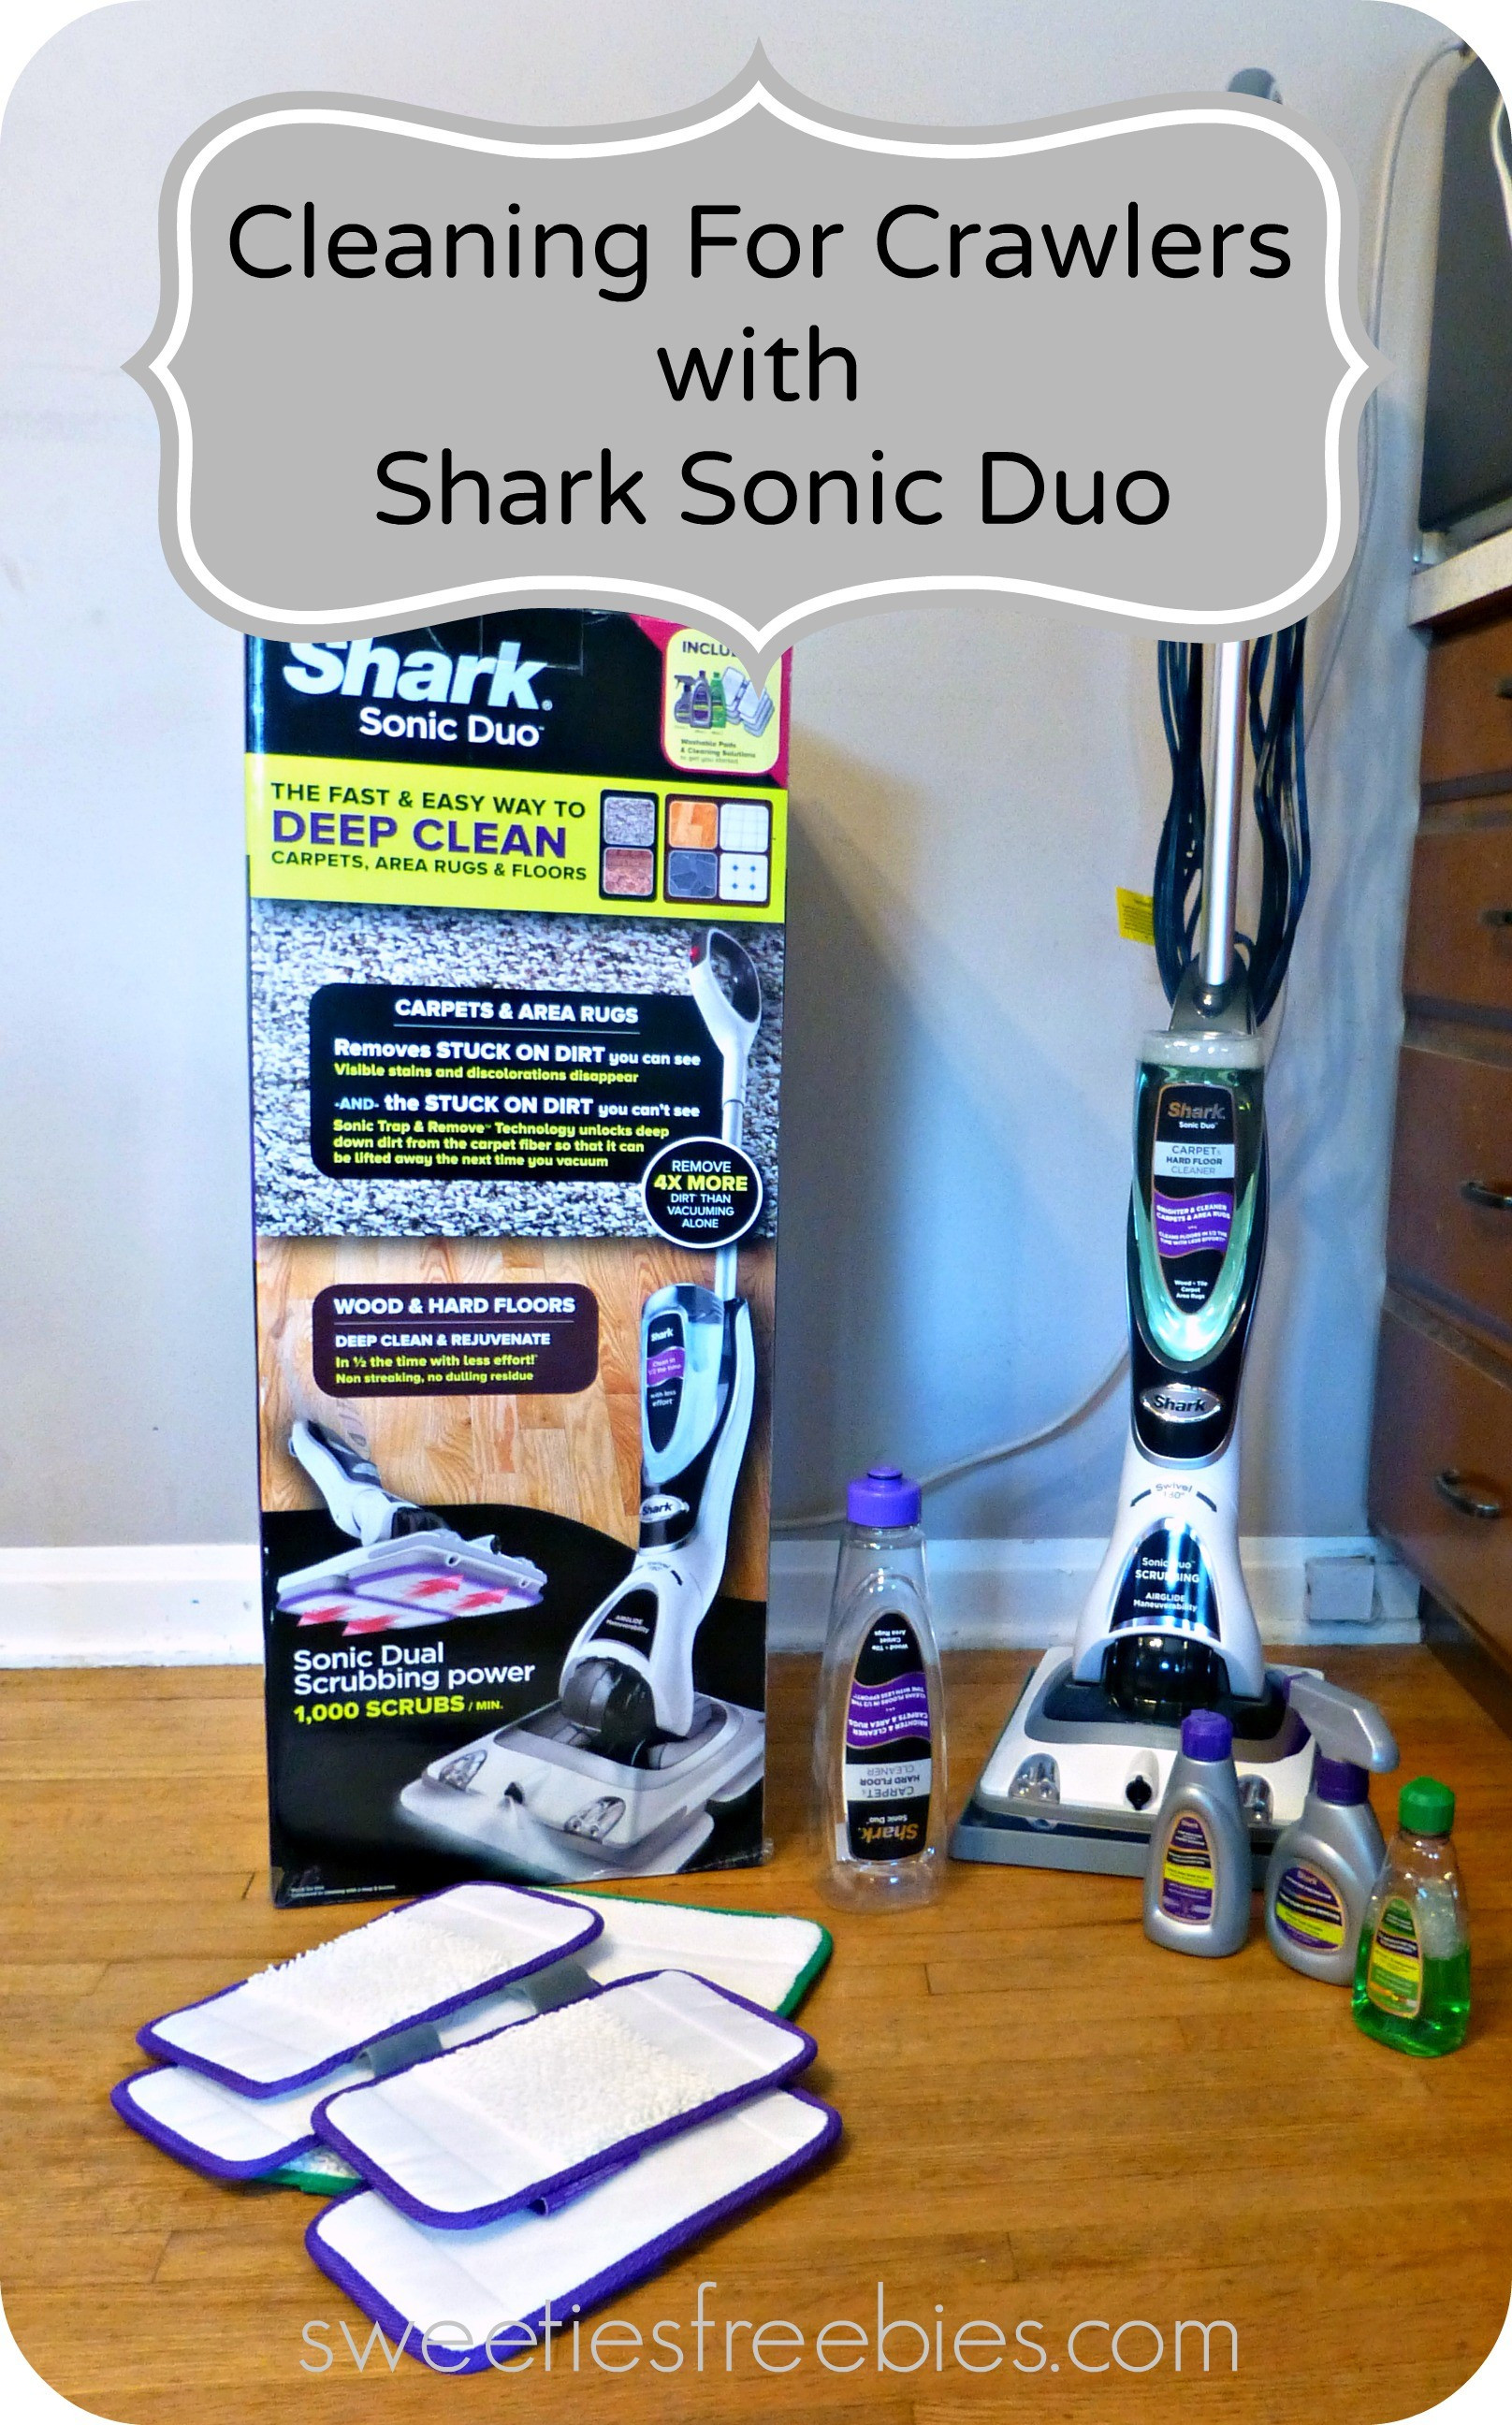 10 attractive Bona Hardwood Floor Care System Reviews 2024 free download bona hardwood floor care system reviews of wood floor steam cleaner astonishing cleaning wooden floors on with regard to shark sonic duo reviews for hardwood floors